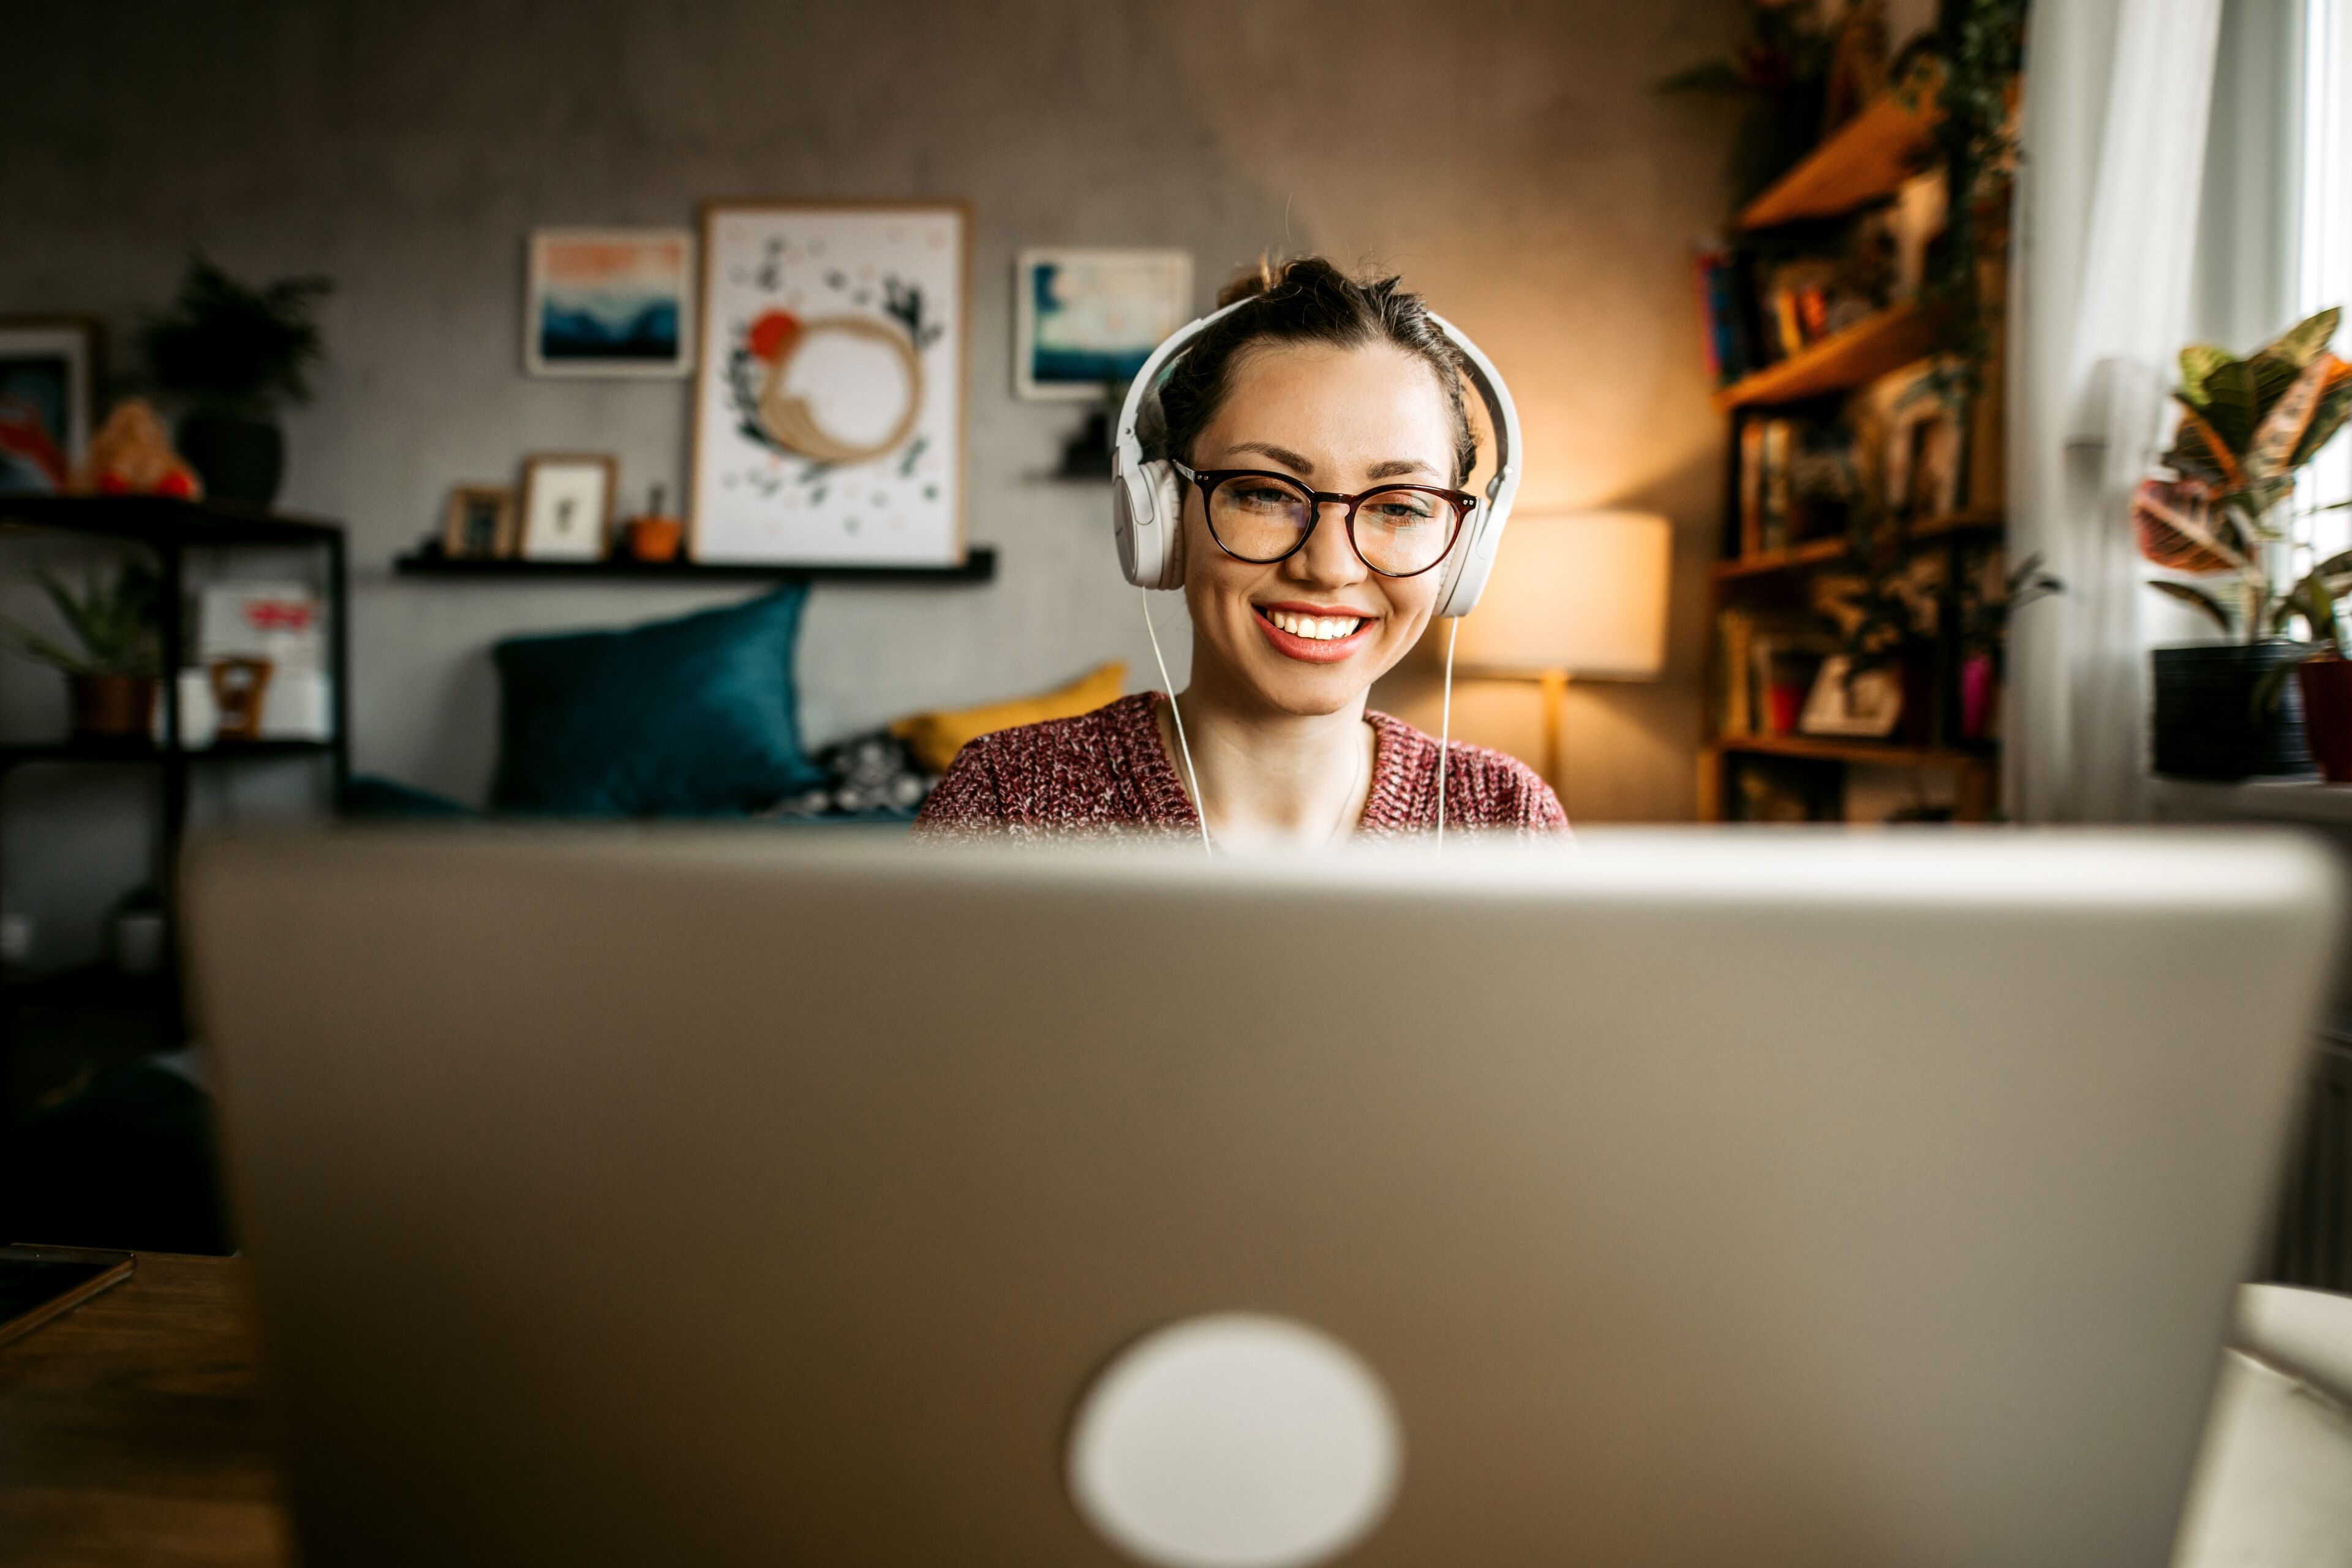 A cheerful woman with headphones working on a laptop in a cozy home office setup, surrounded by warm decor.